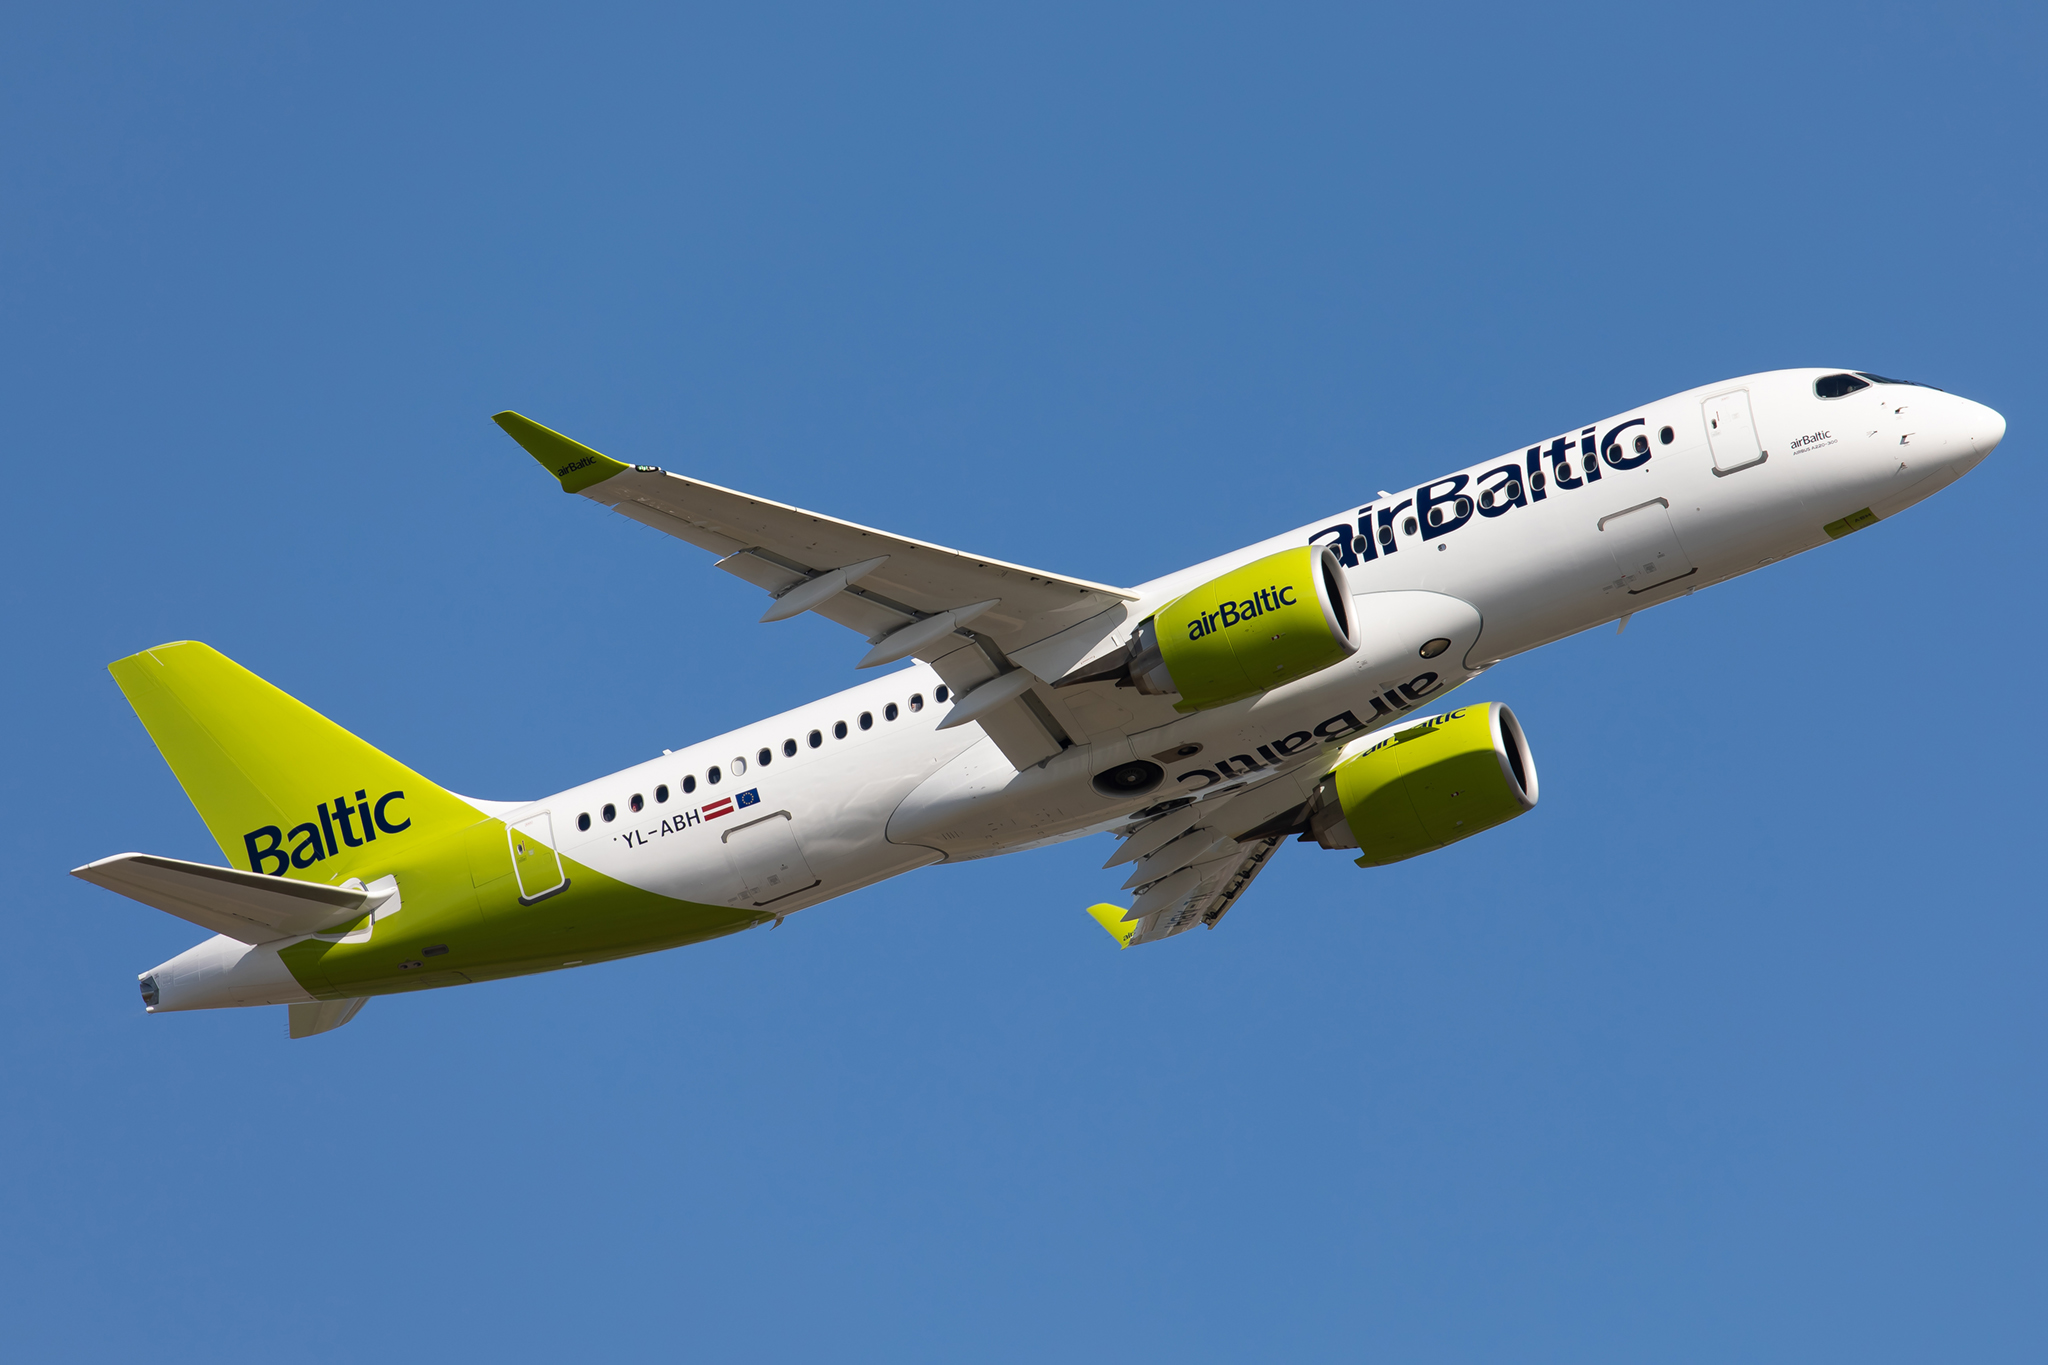 Air Baltic A220-300 YL-ABH departing Sydney (Photo: Rory Delaney)